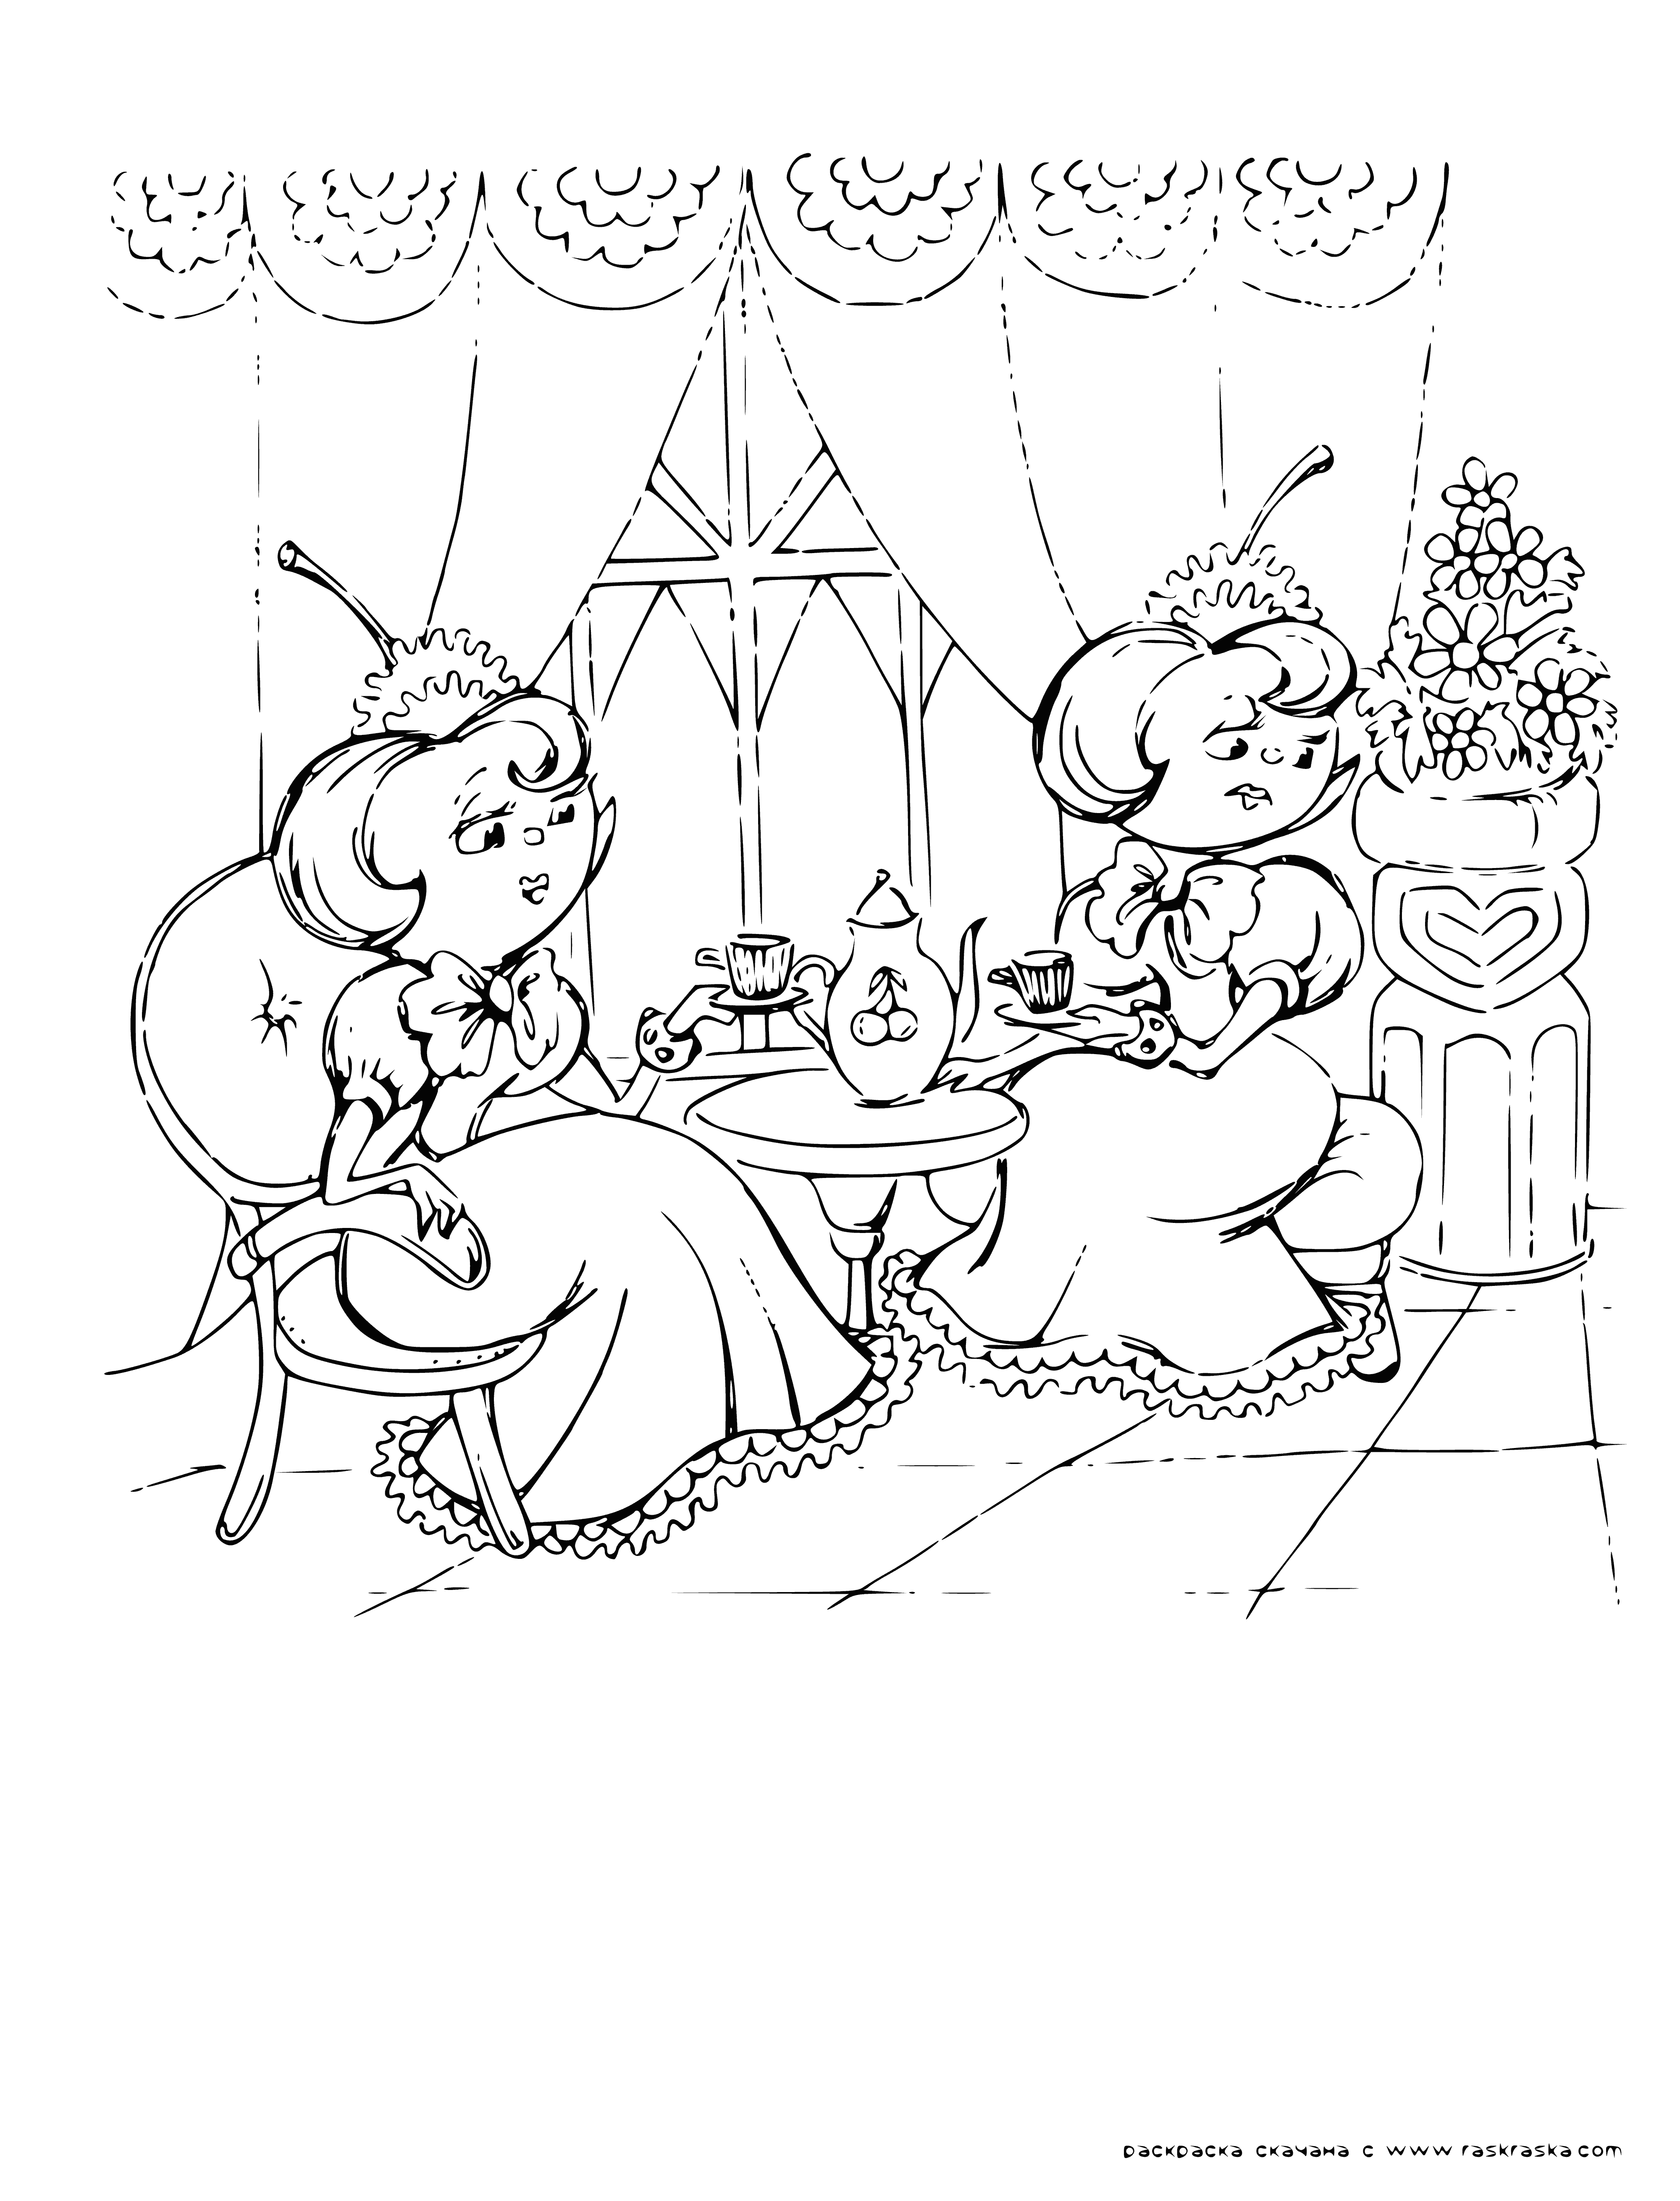 Countess Cherries coloring page